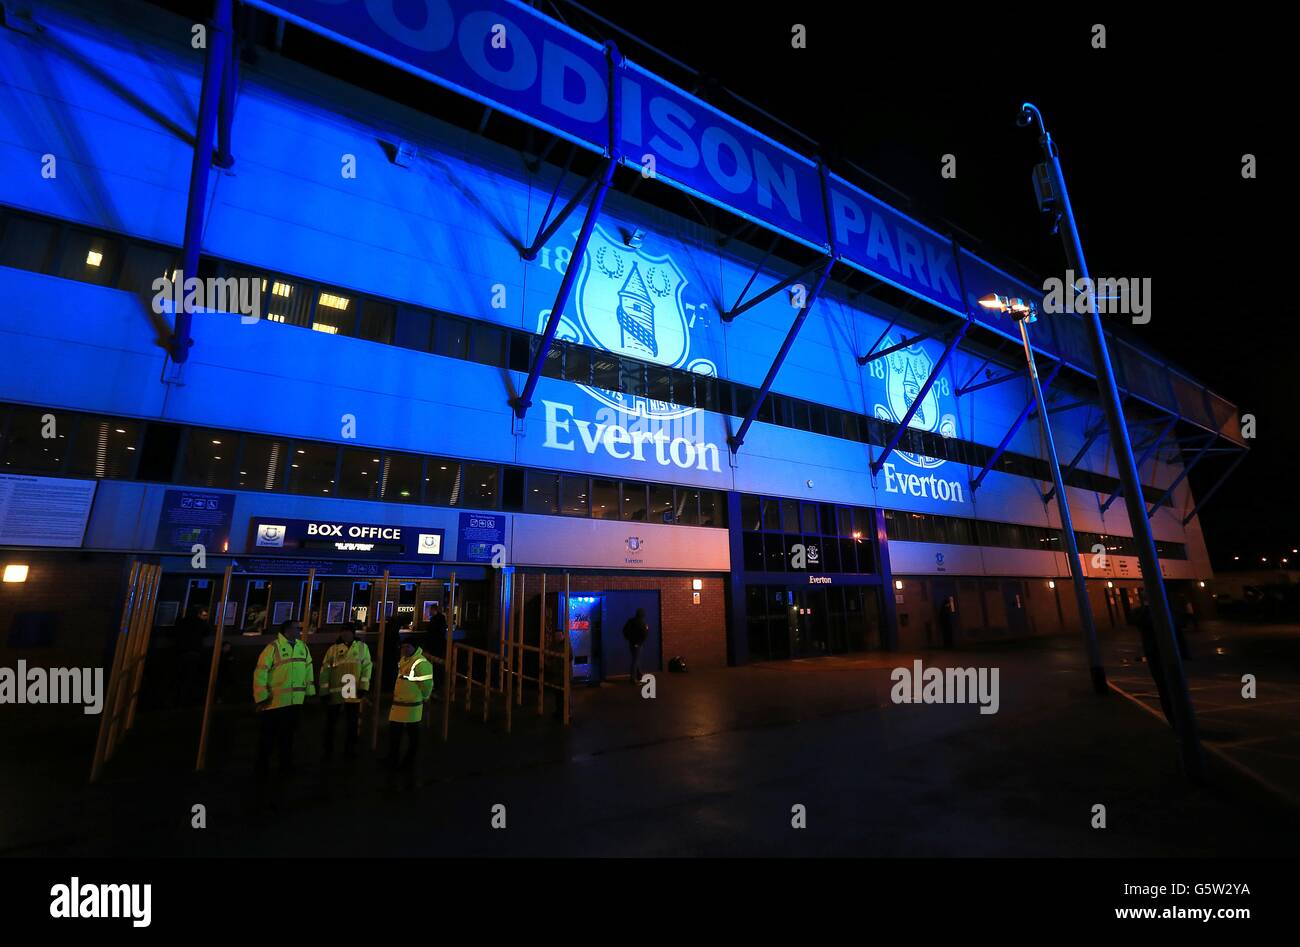 Soccer - Barclays Premier League - Everton v West Bromwich Albion - Goodison Park. A light show welcomes fans to Goodison Park before the game Stock Photo